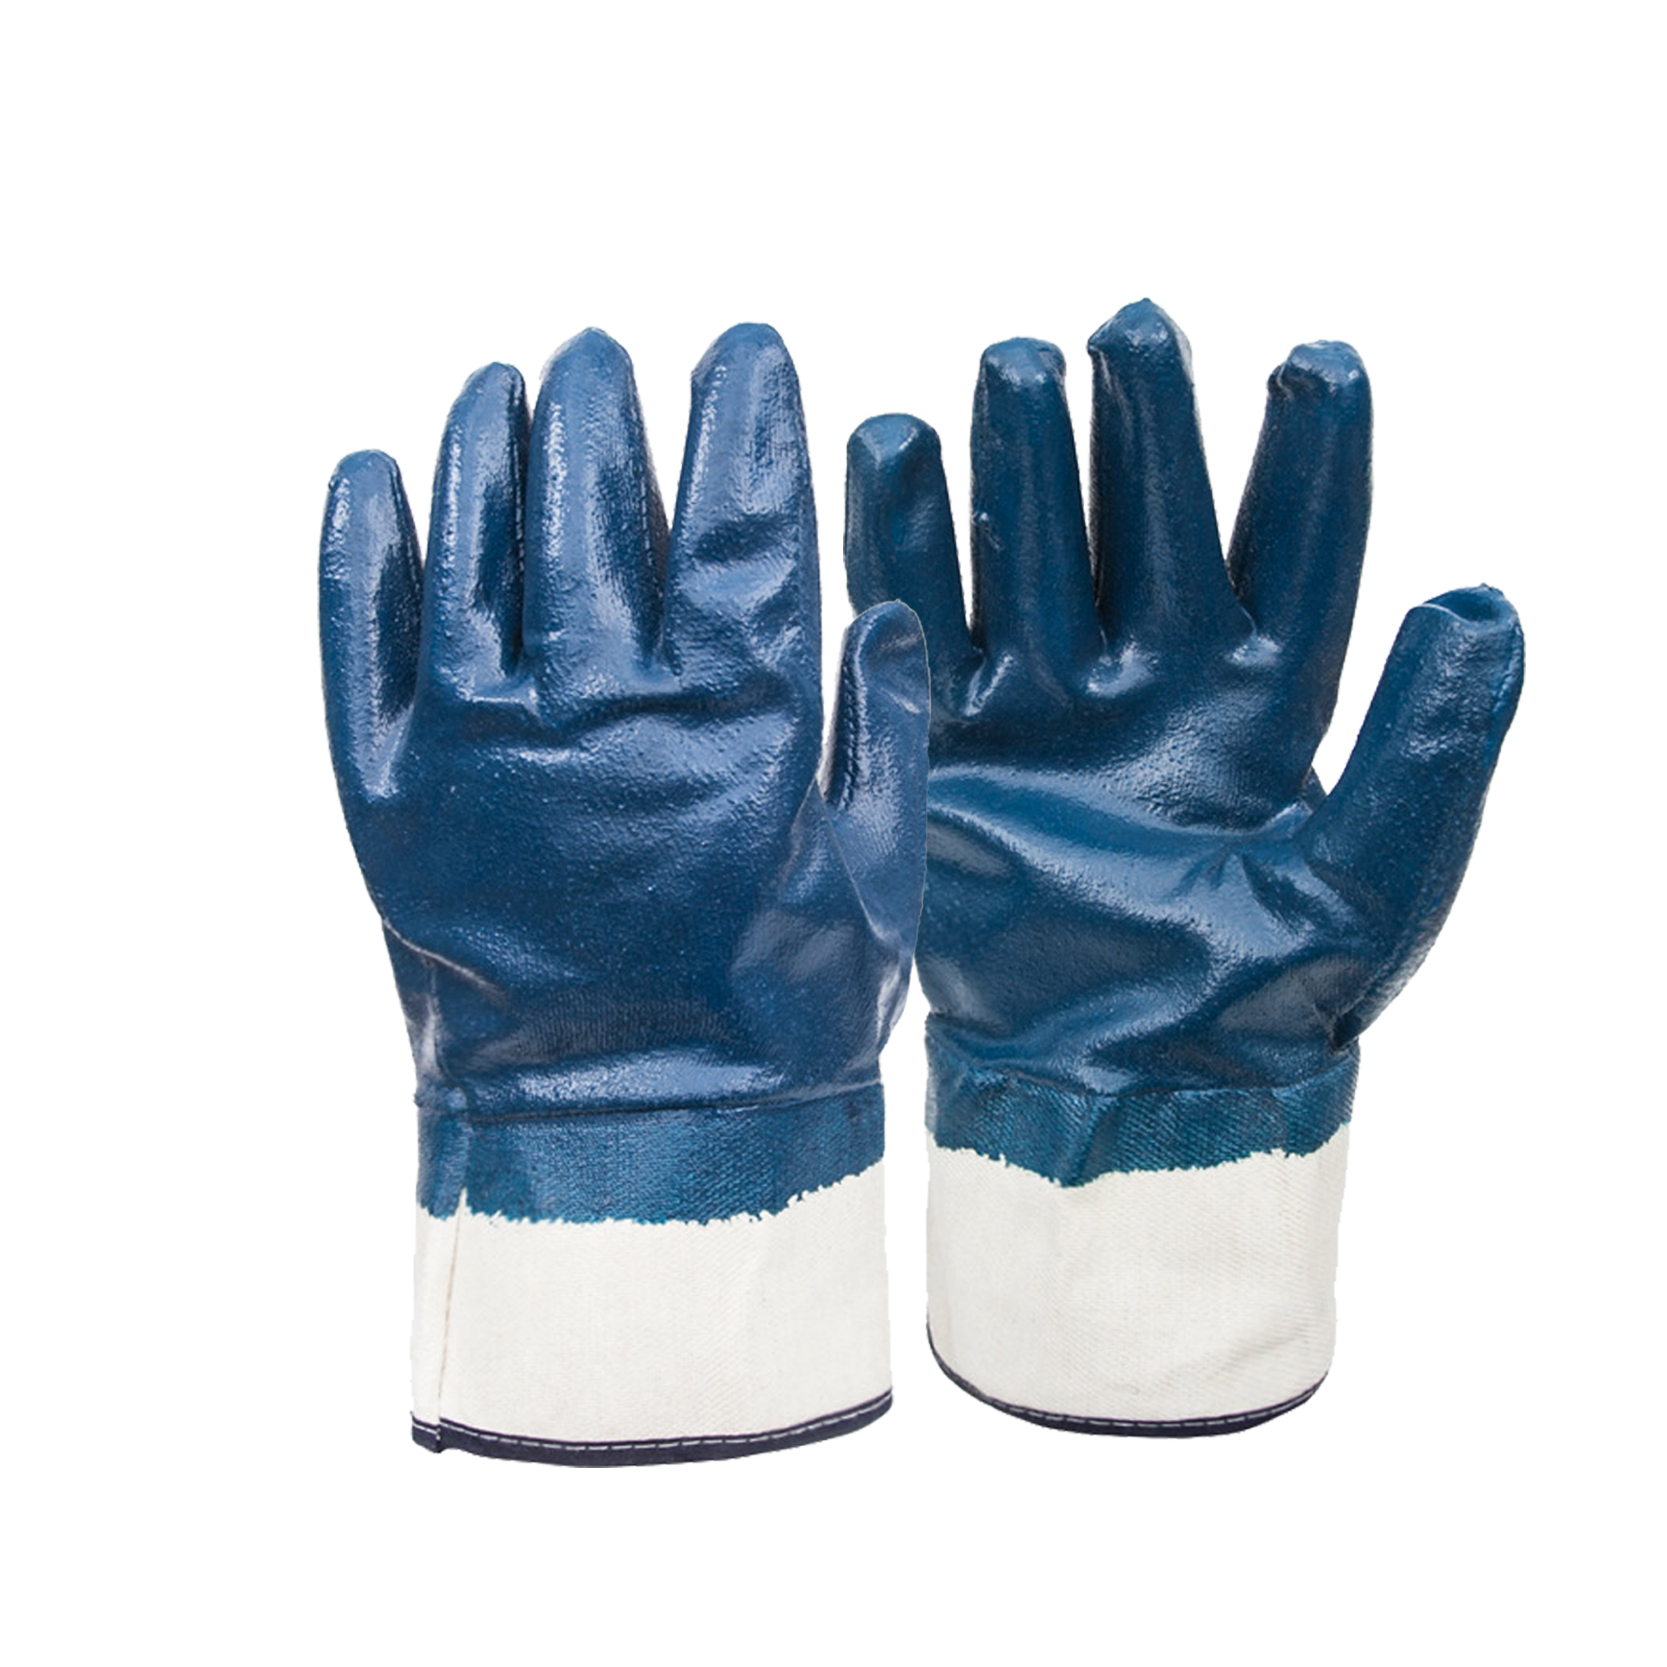 Heavy Weight Fully Coated Nitrile Gloves Safety Work Gloves Flannelette Lining Warm Oil Resistant Nitrile Industrial Gloves